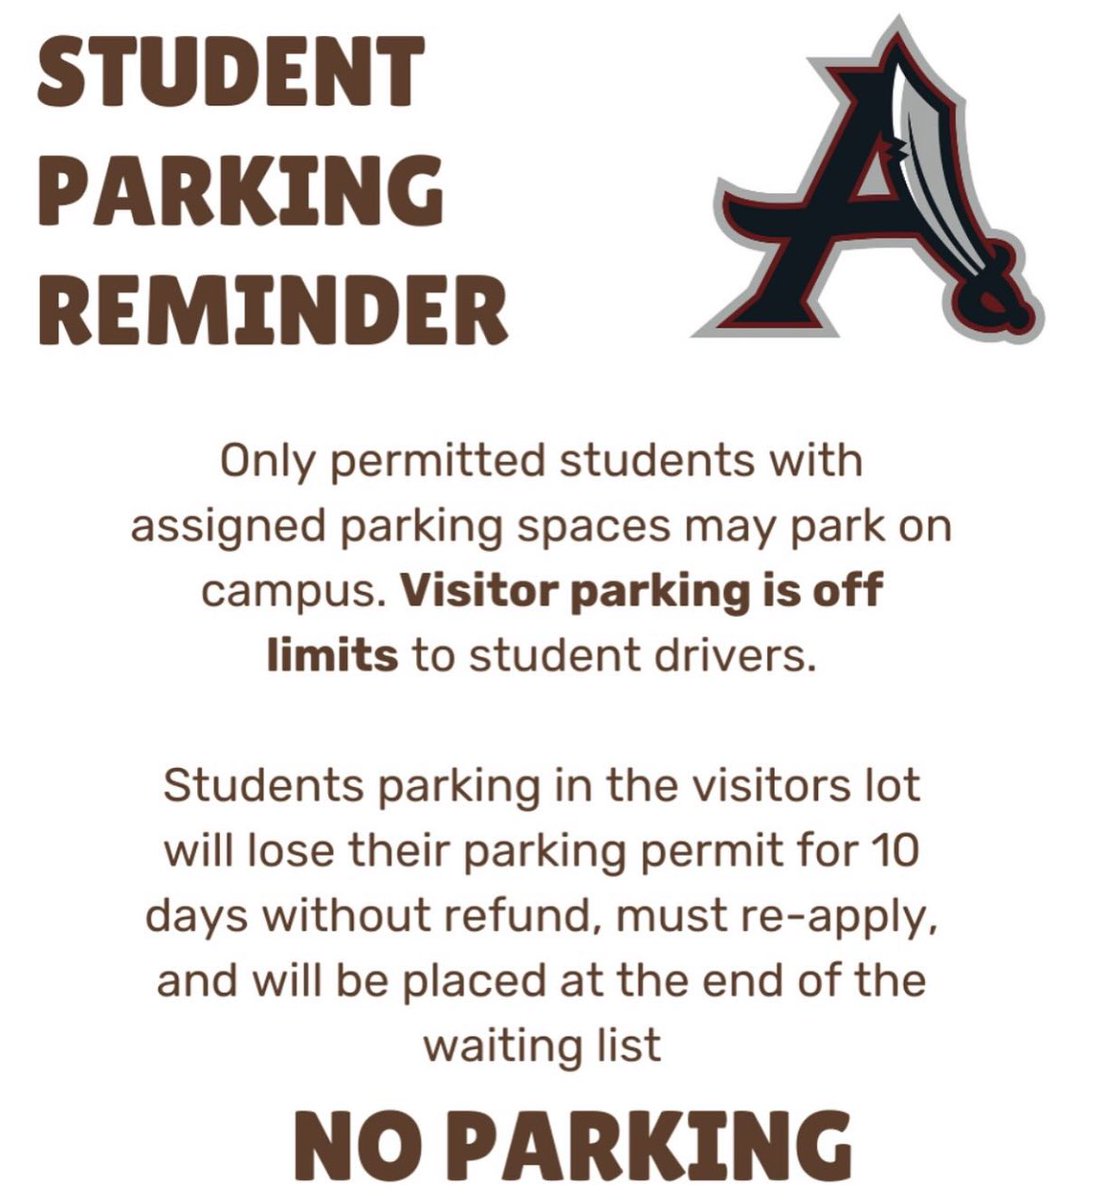 Student drivers with parking passes please read 🚙💭 #alpharettahighschool